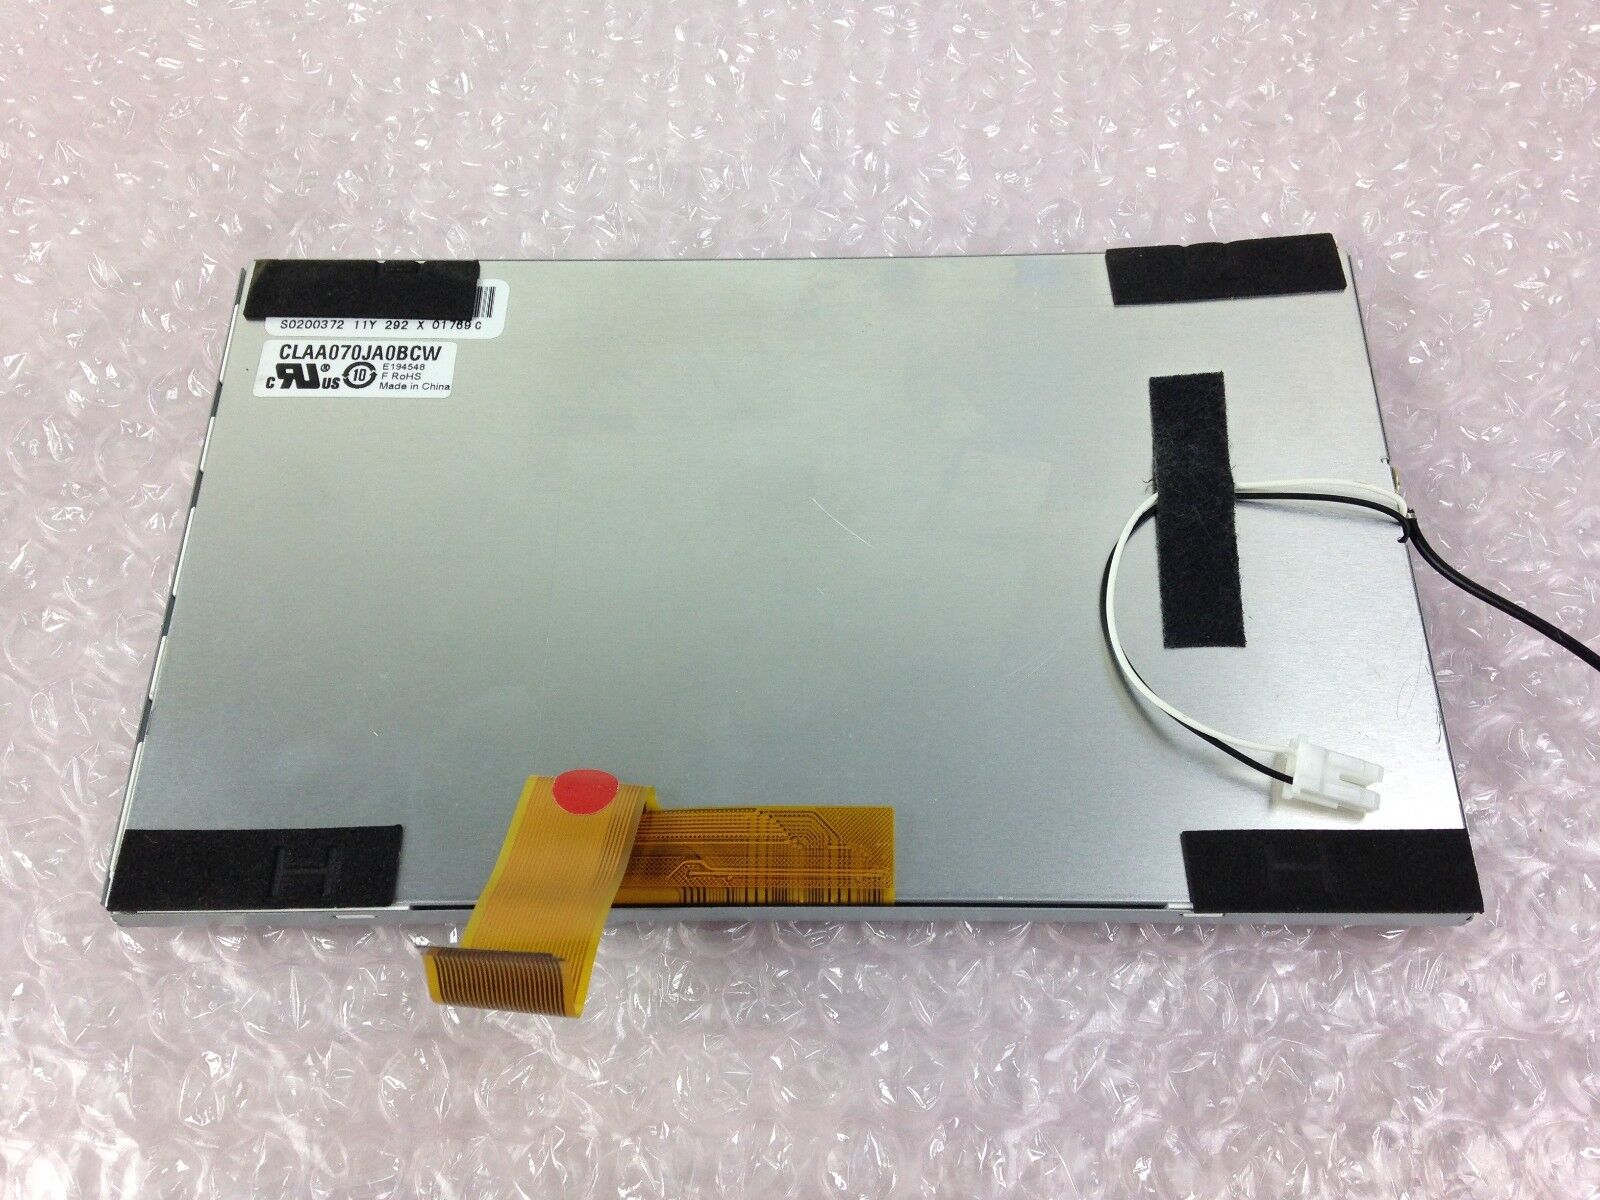 CLAA070LD0DCW 7" LCD Panel Screen 1024 x 768 Display Assembly